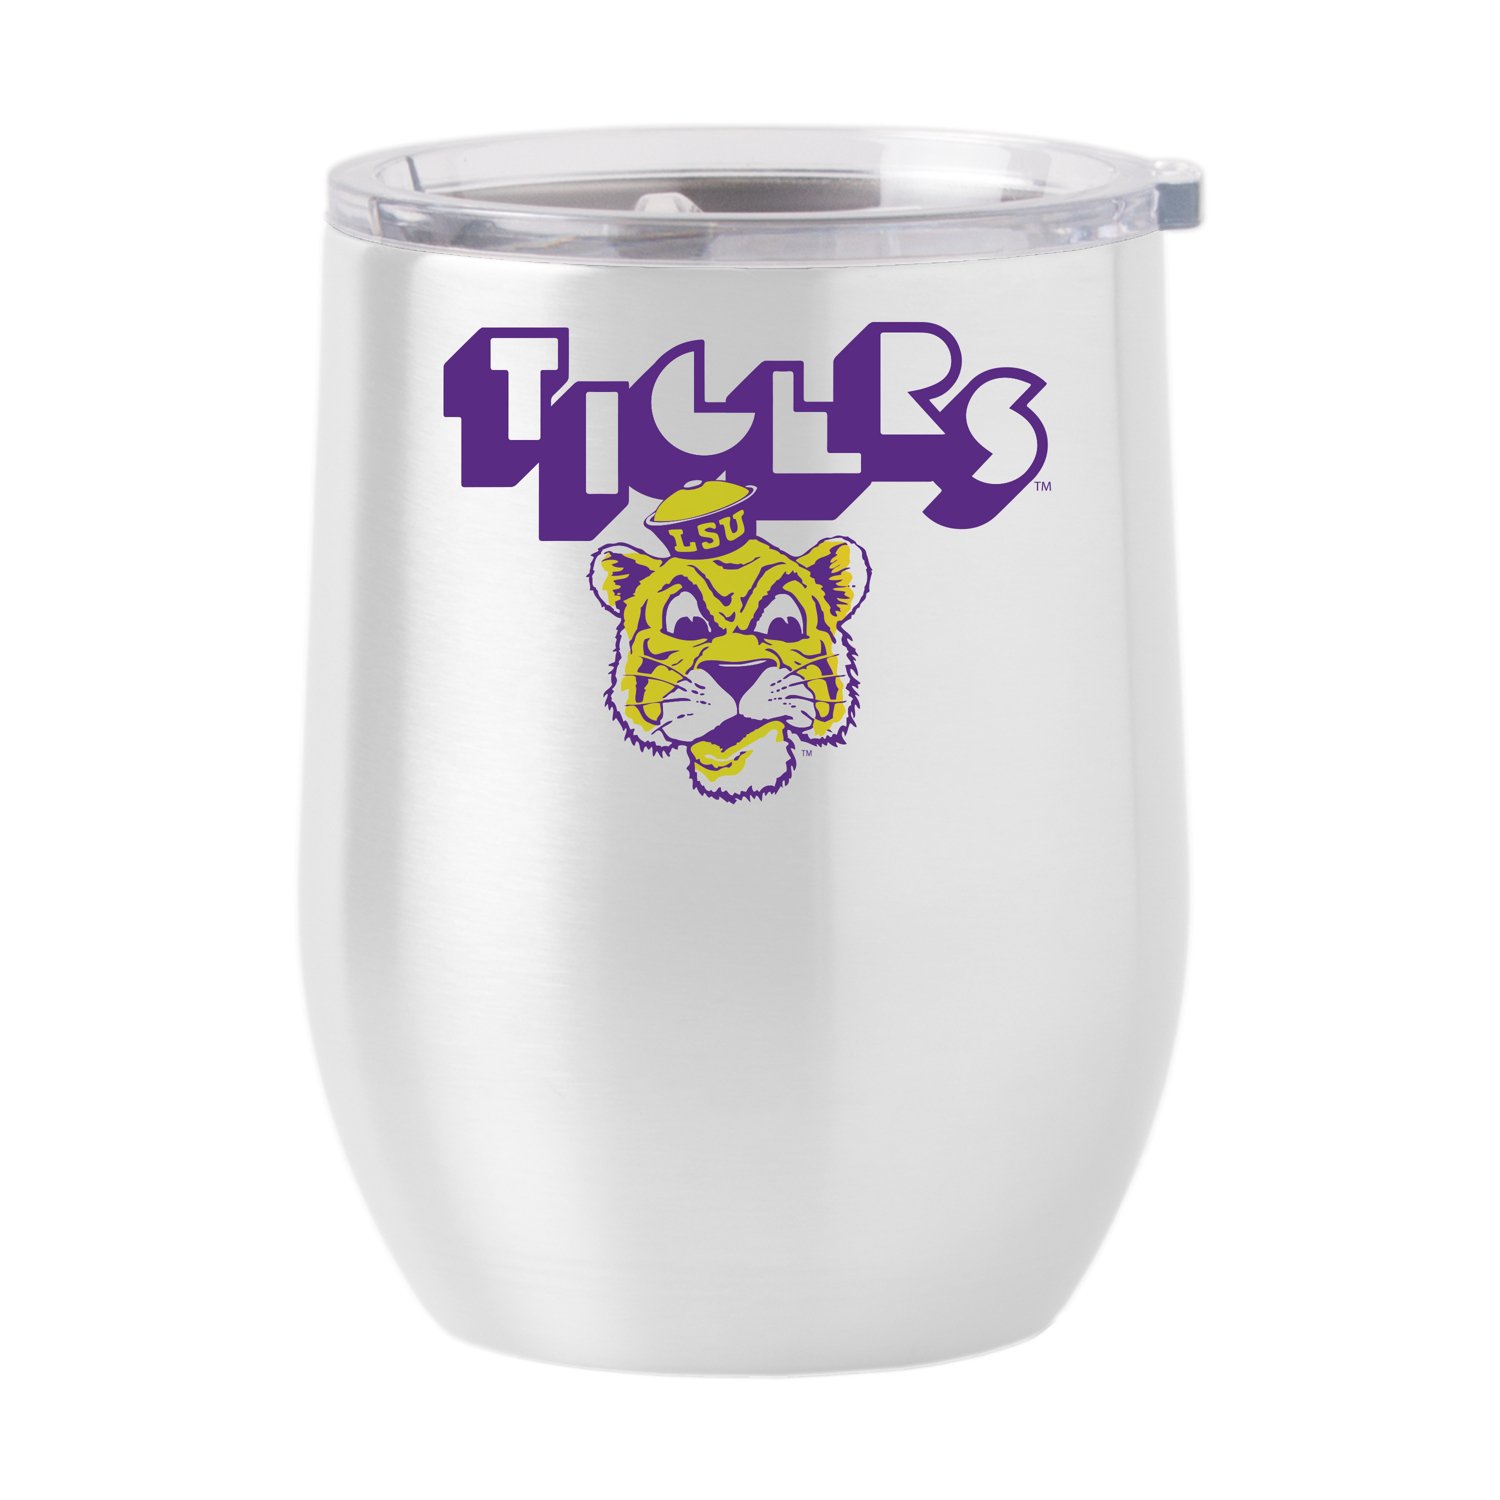 https://academy.scene7.com/is/image/academy//drinkware/logo-brands-louisiana-state-university-16-oz-arcade-stainless-curved-beverage-tumbler-162v-s16cb-59-white/112ae86a5e3241a0812e7ca2cfef6e5d?$pdp-gallery-ng$